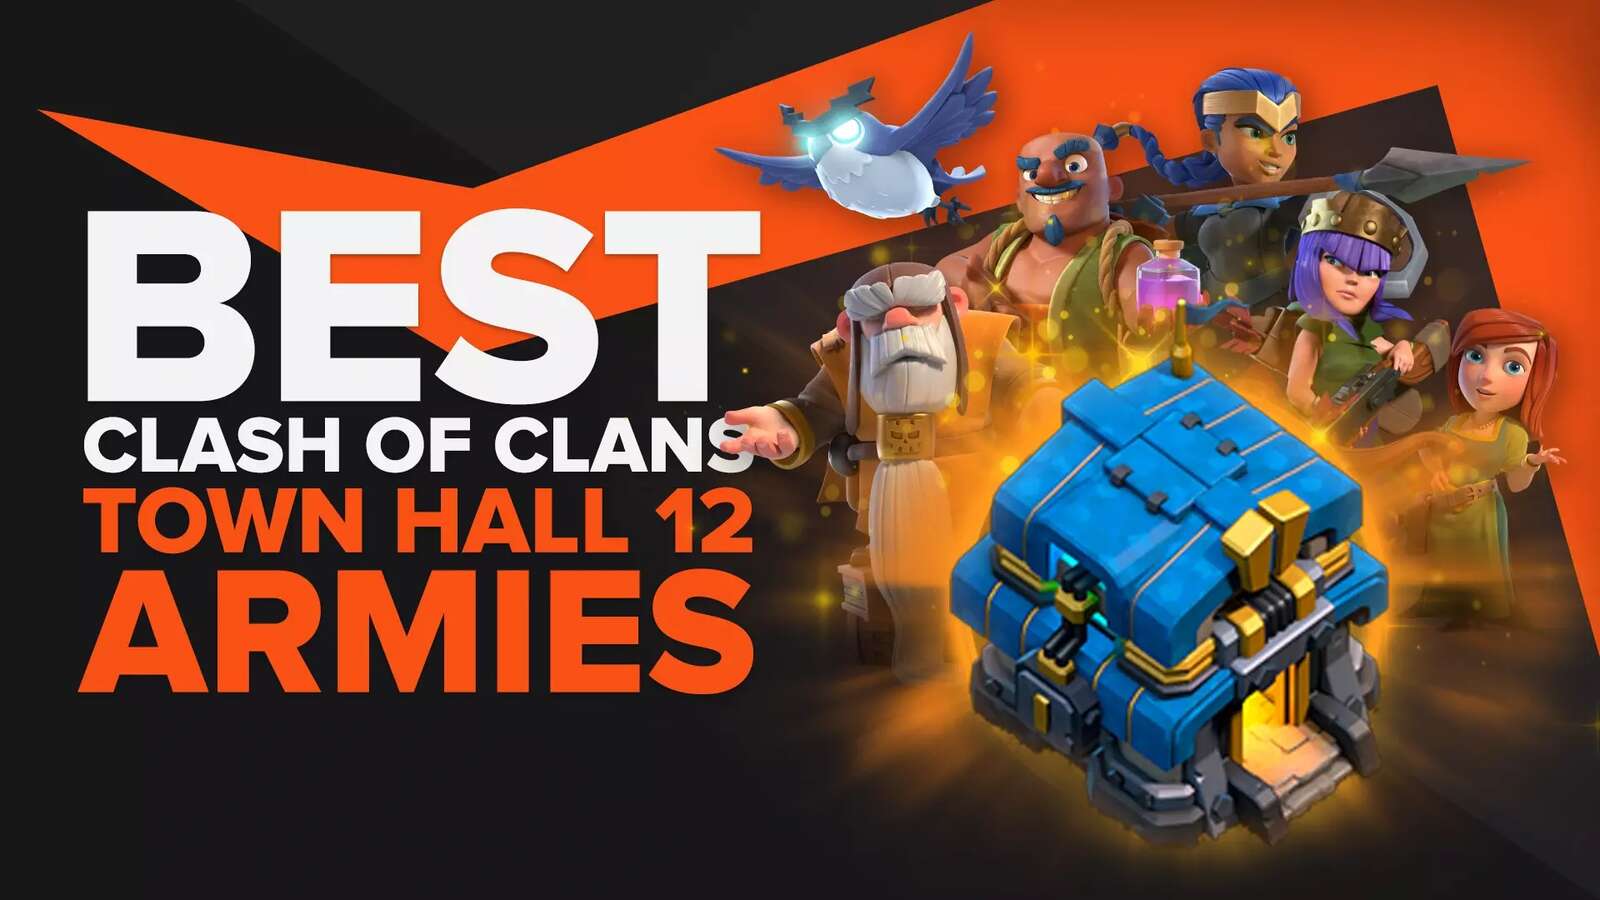 What Is The Best Army In Clash of Clans For Town Hall 12